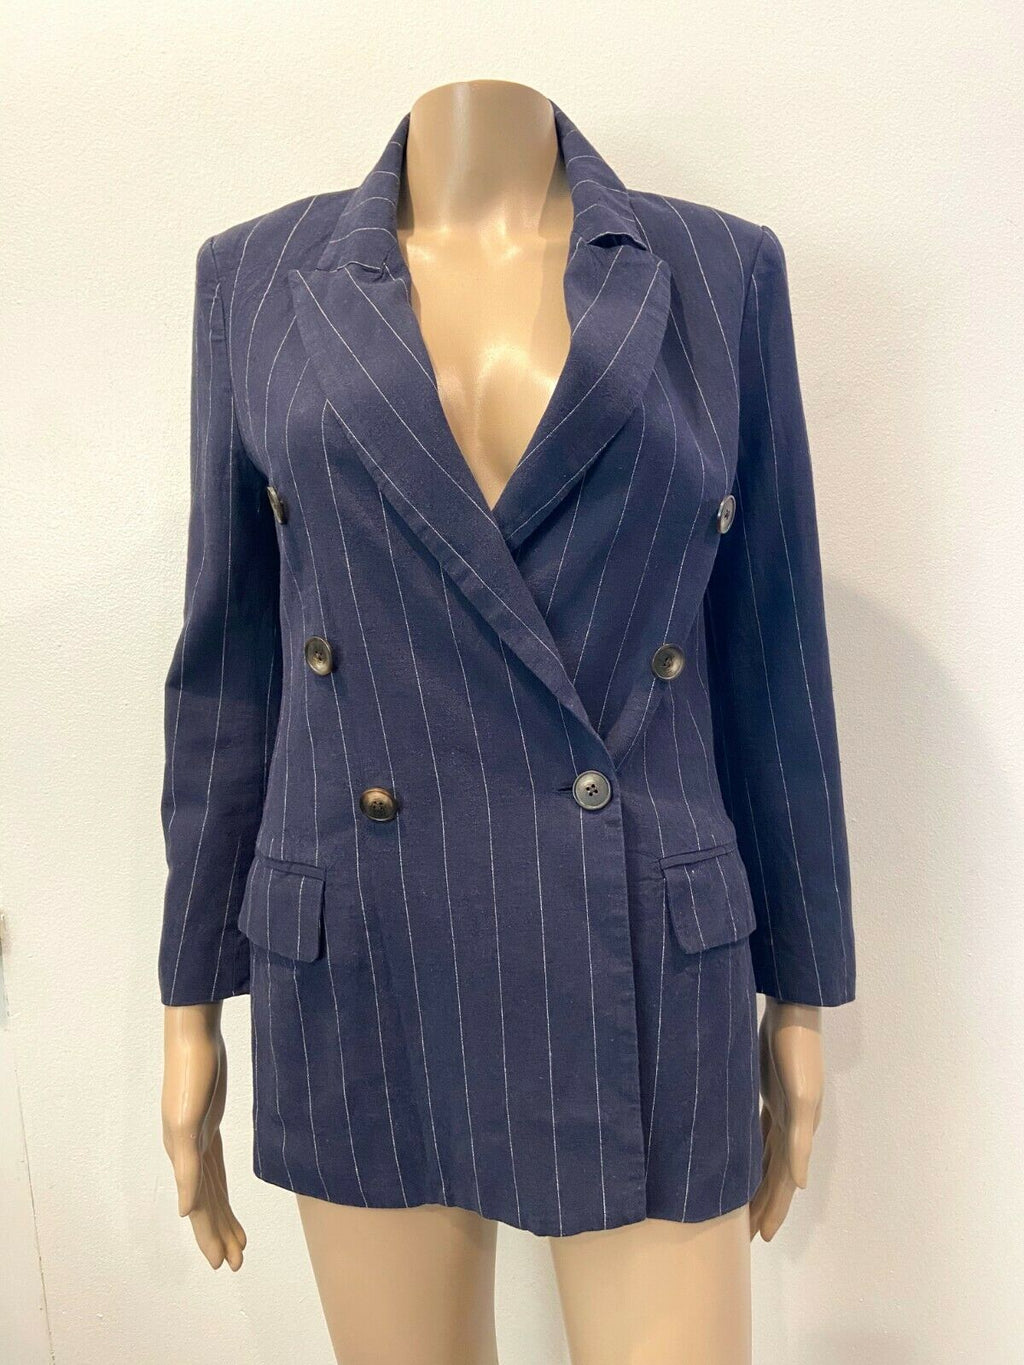 L'Agence Brea Navy Striped Double-Breasted Blazer